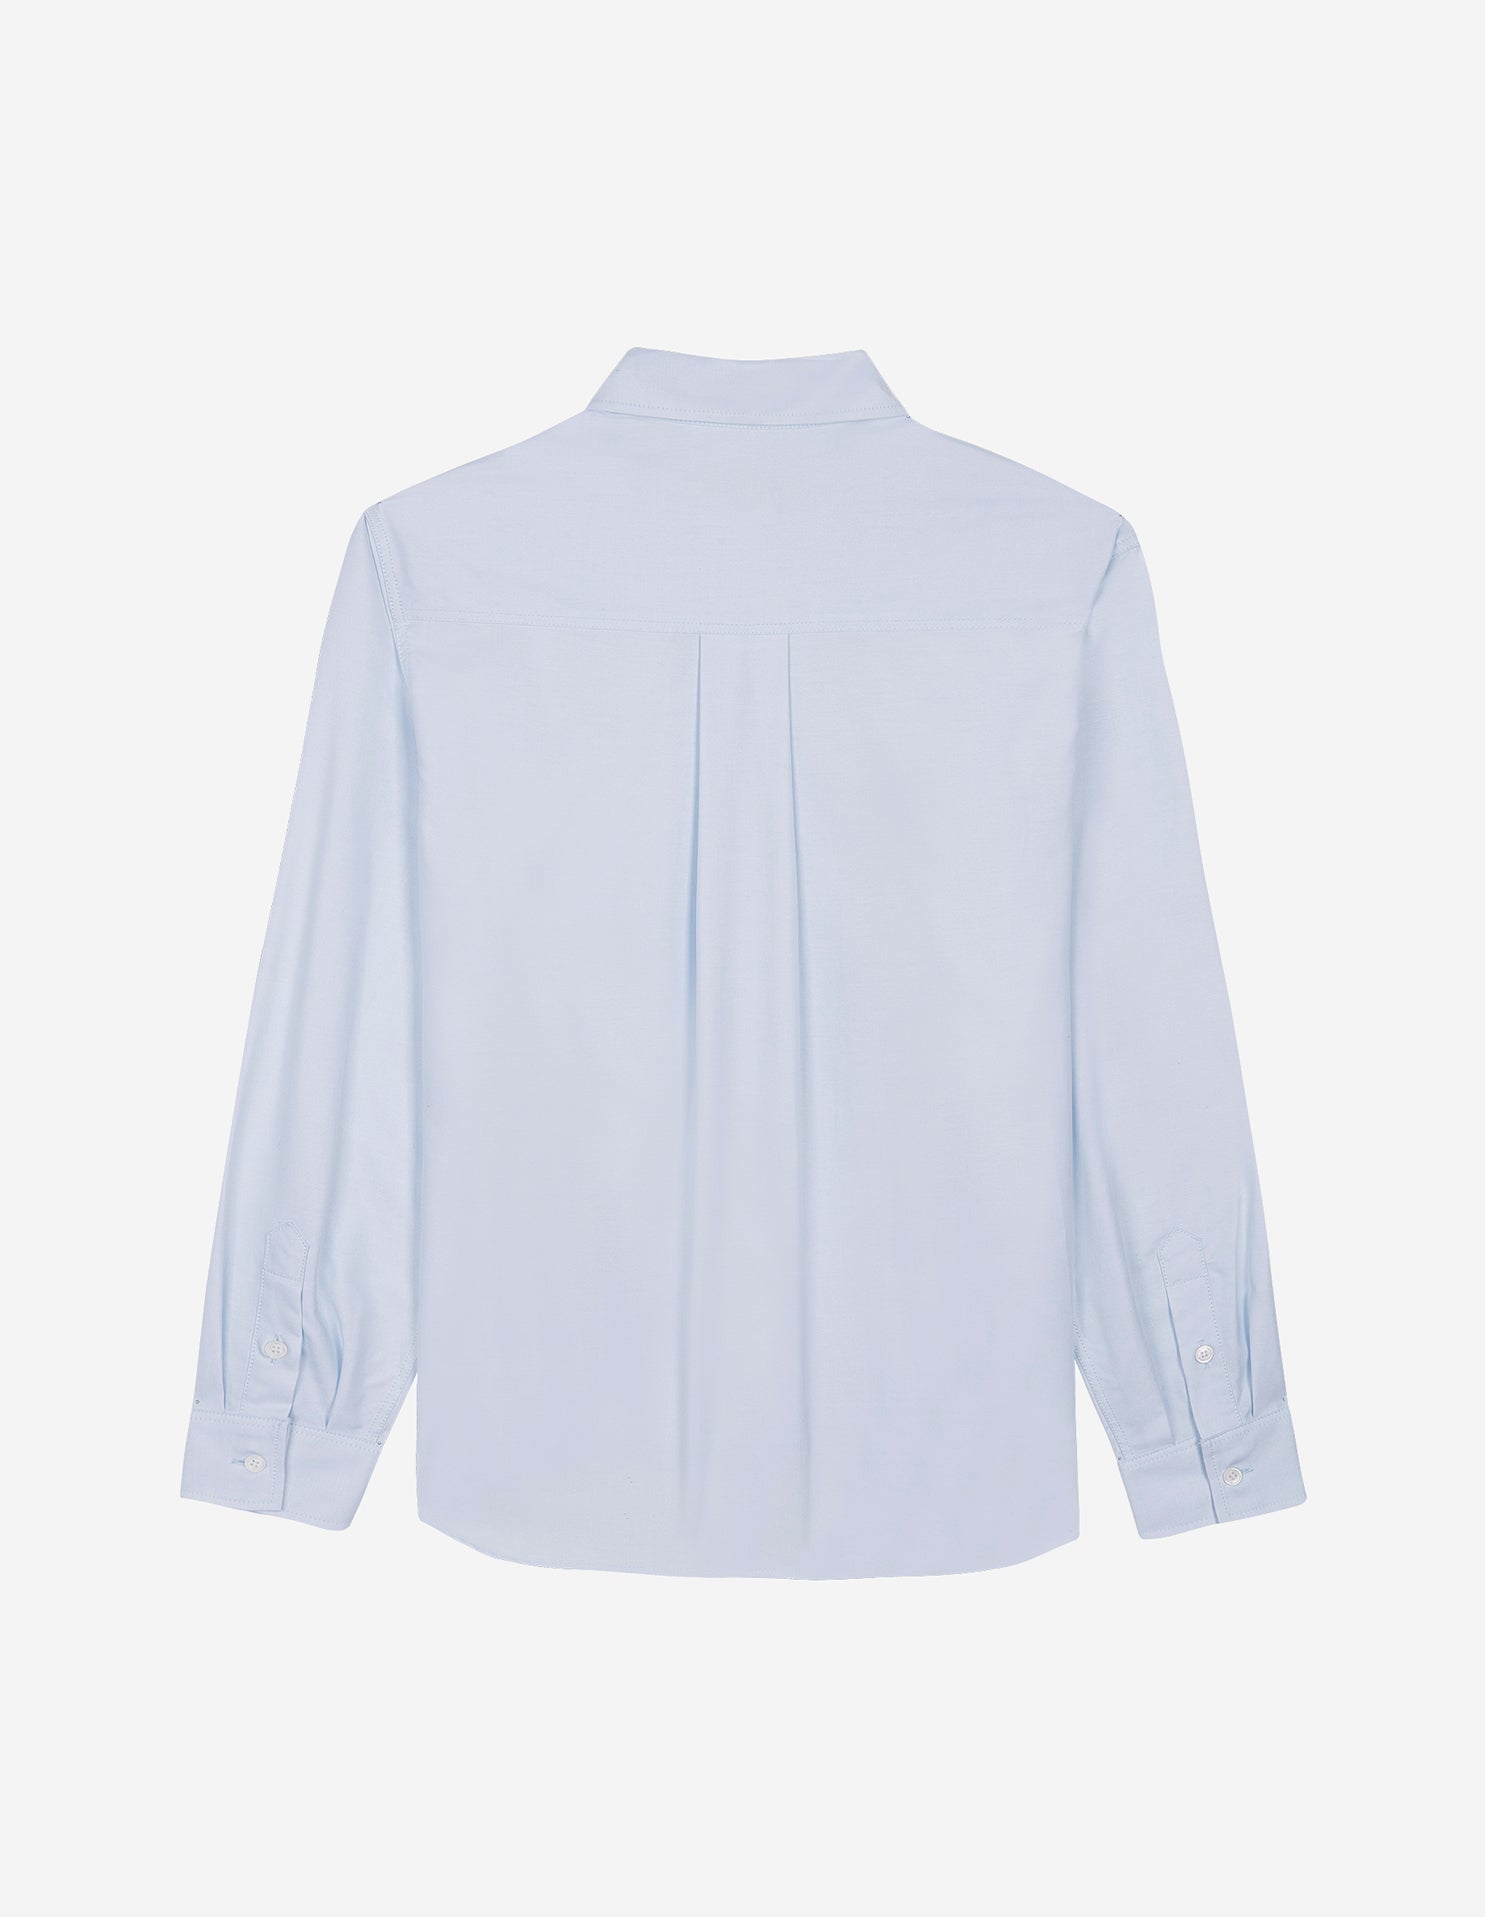 Women's Button-down Classic Shirt With Institutional Fox Head